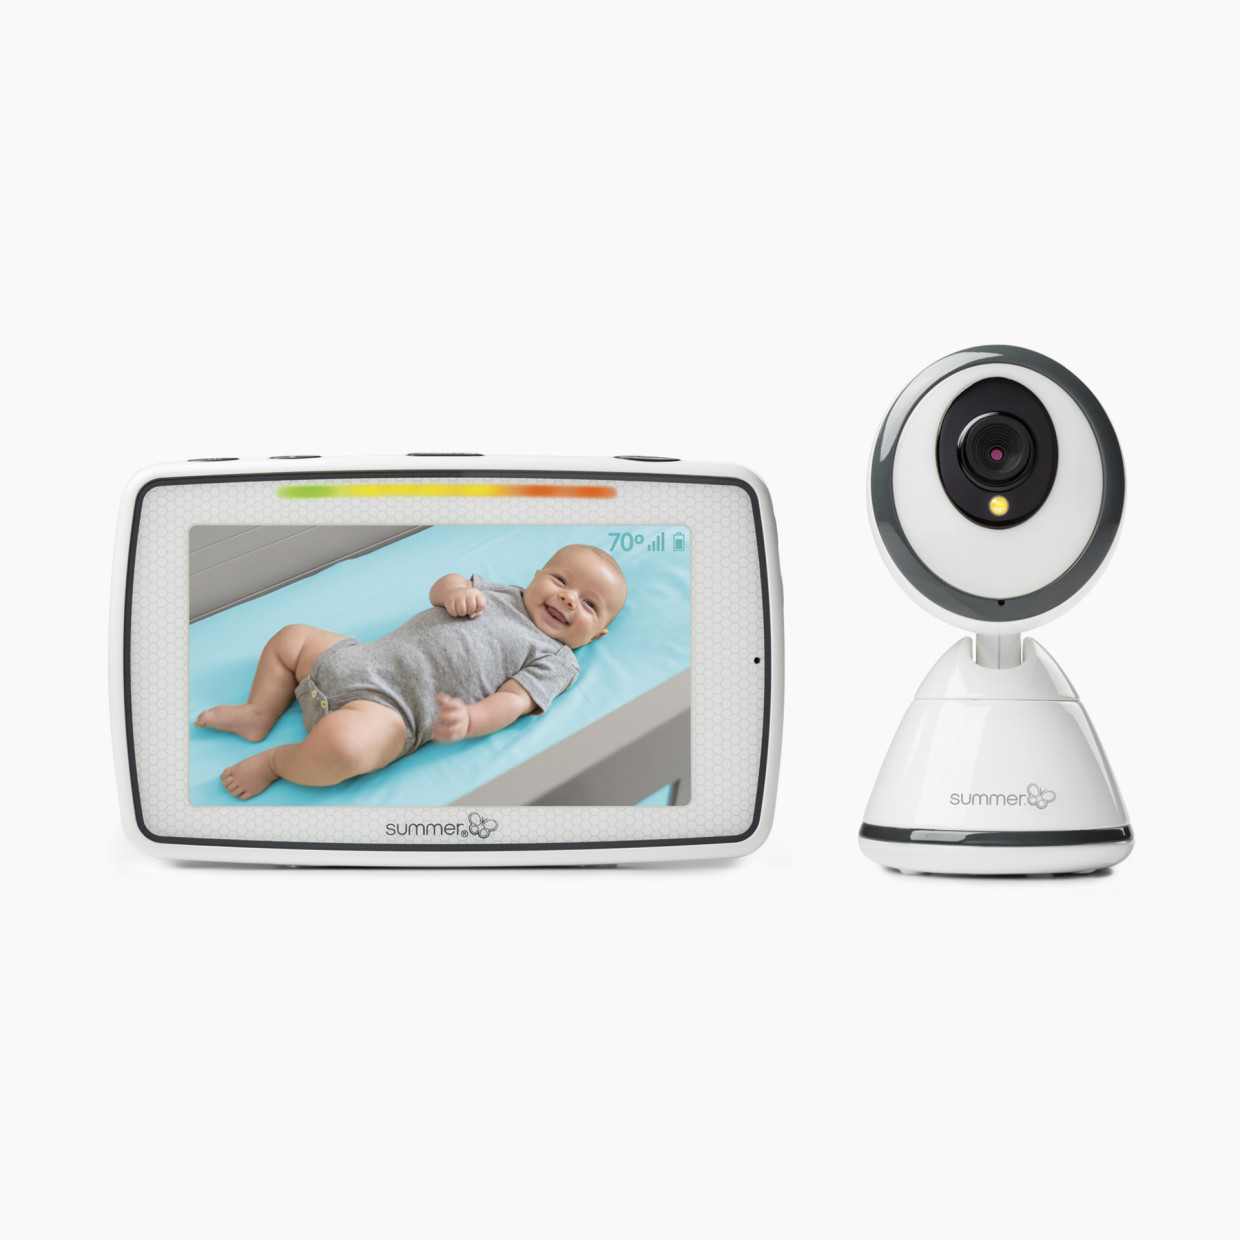 Summer Baby Pixel 5.0 Inch Touchscreen Color Video Monitor.